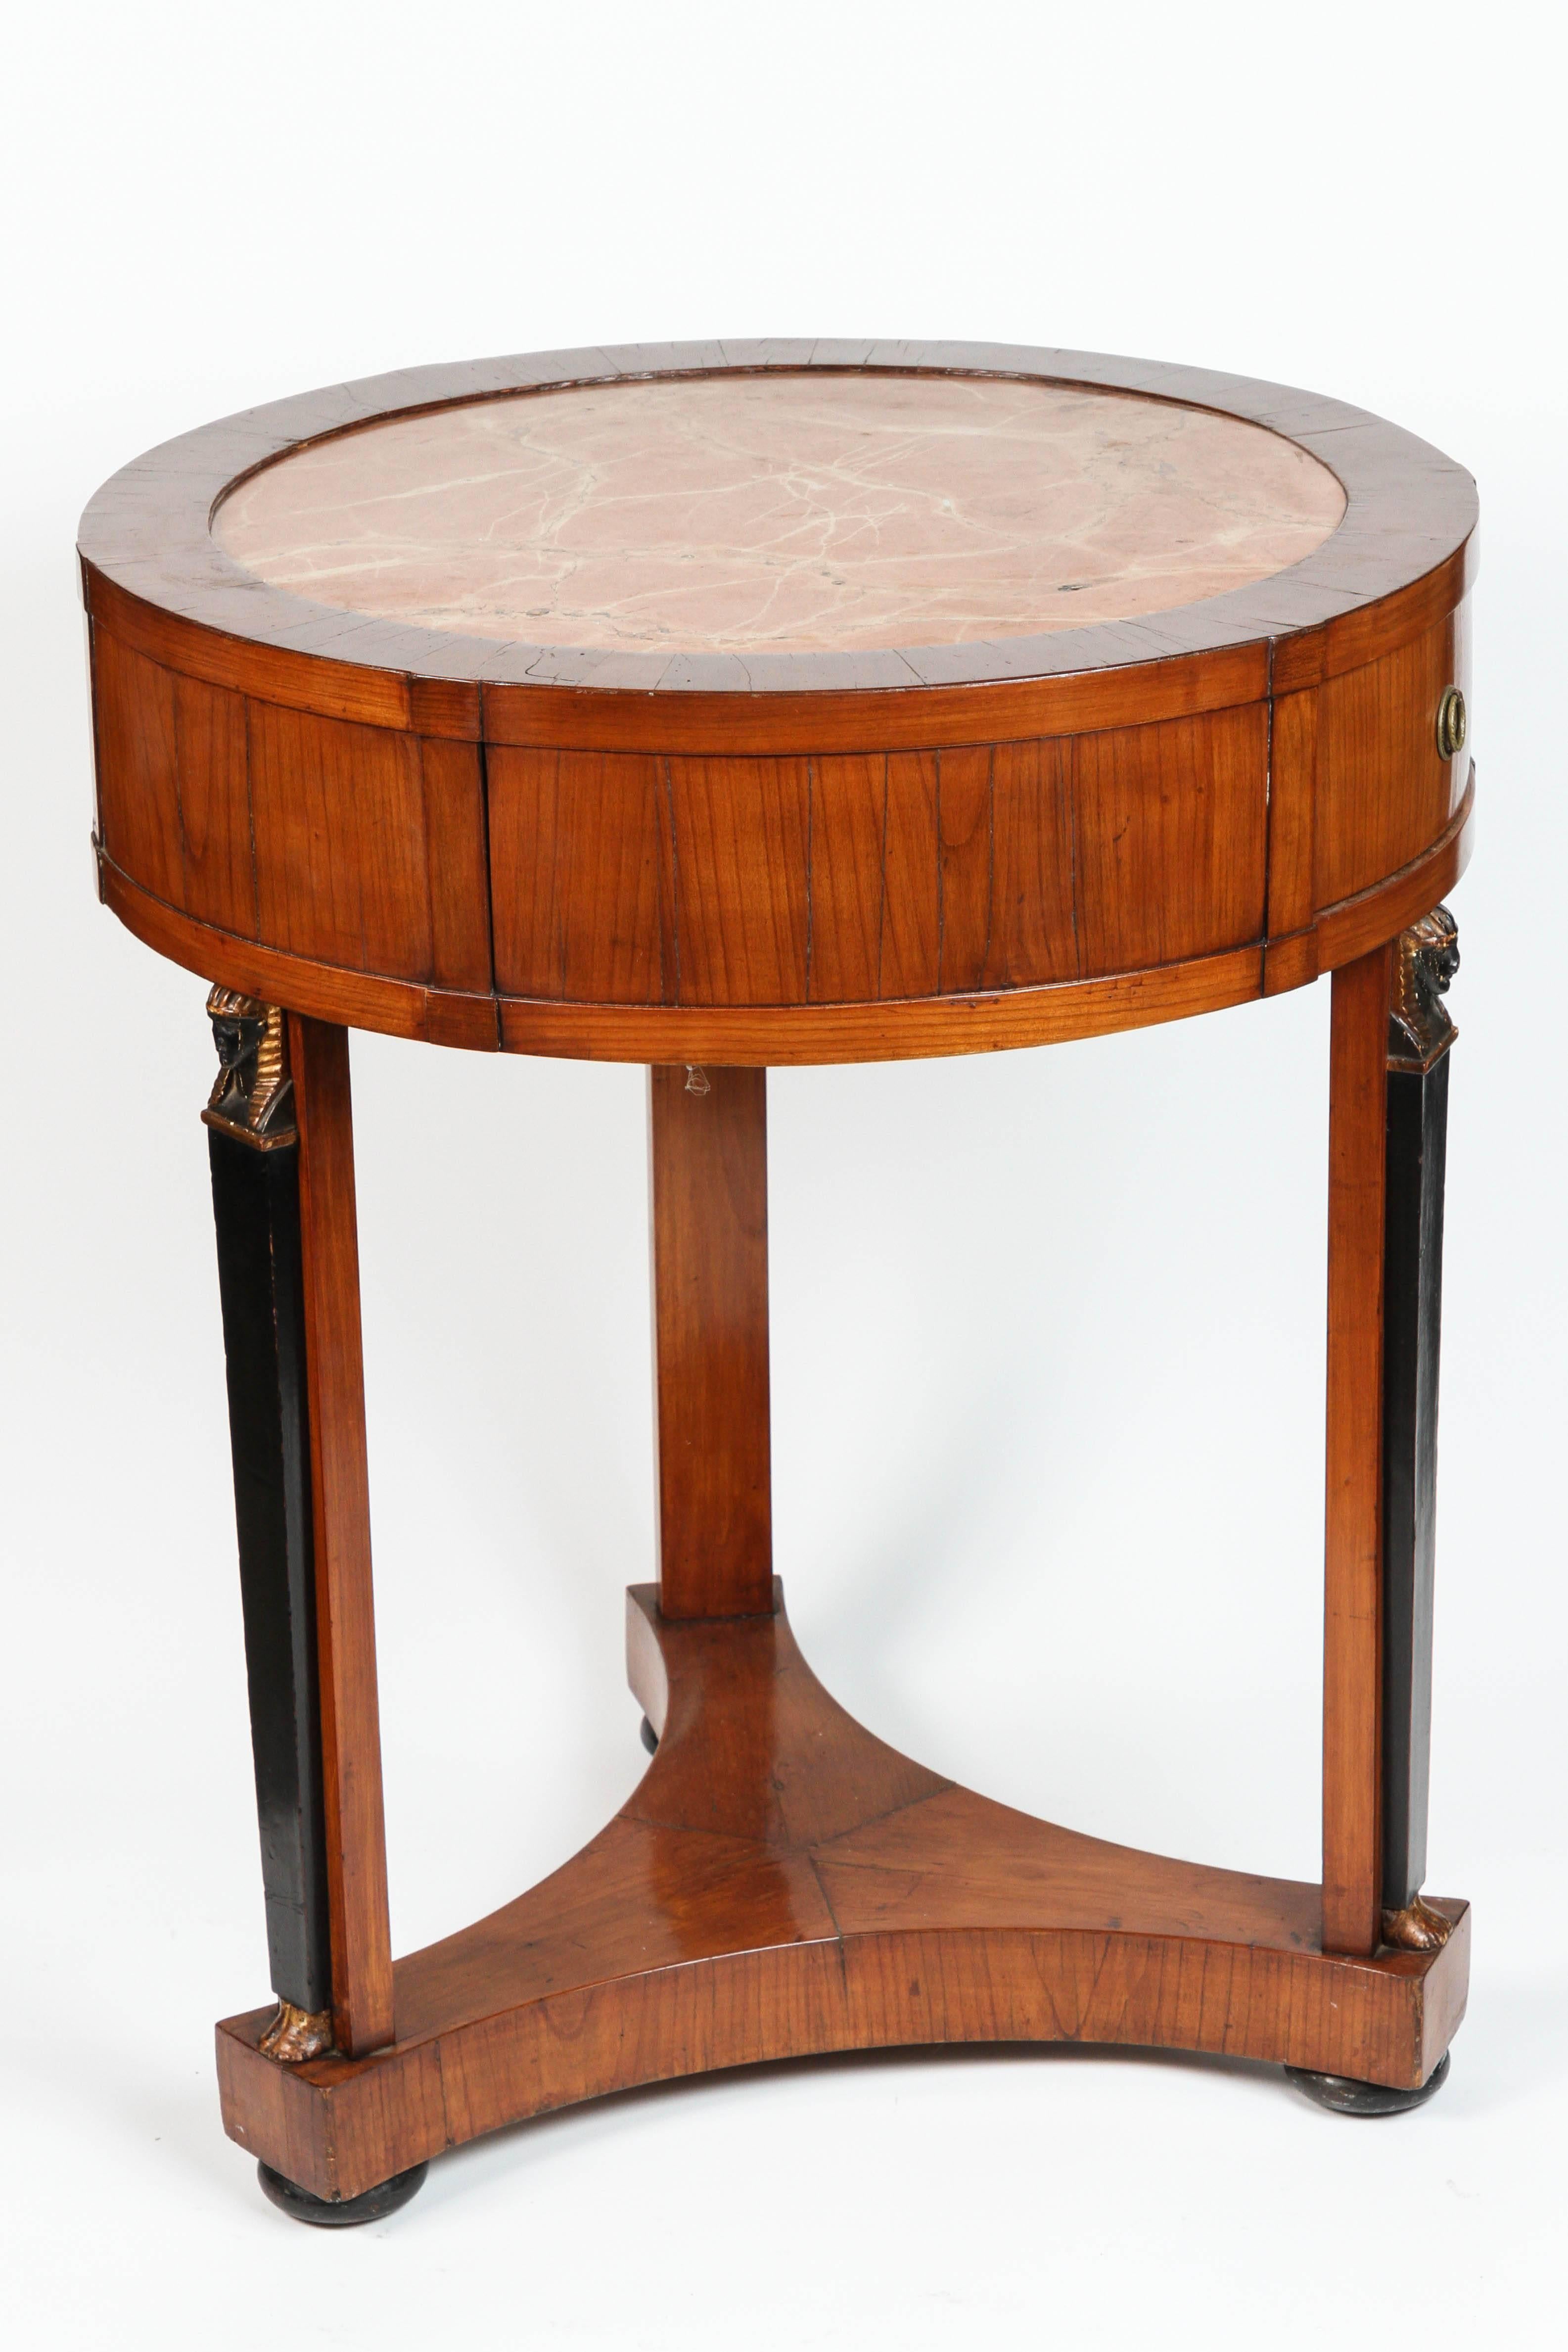 Early 19th Century Neoclassical Round Table 1